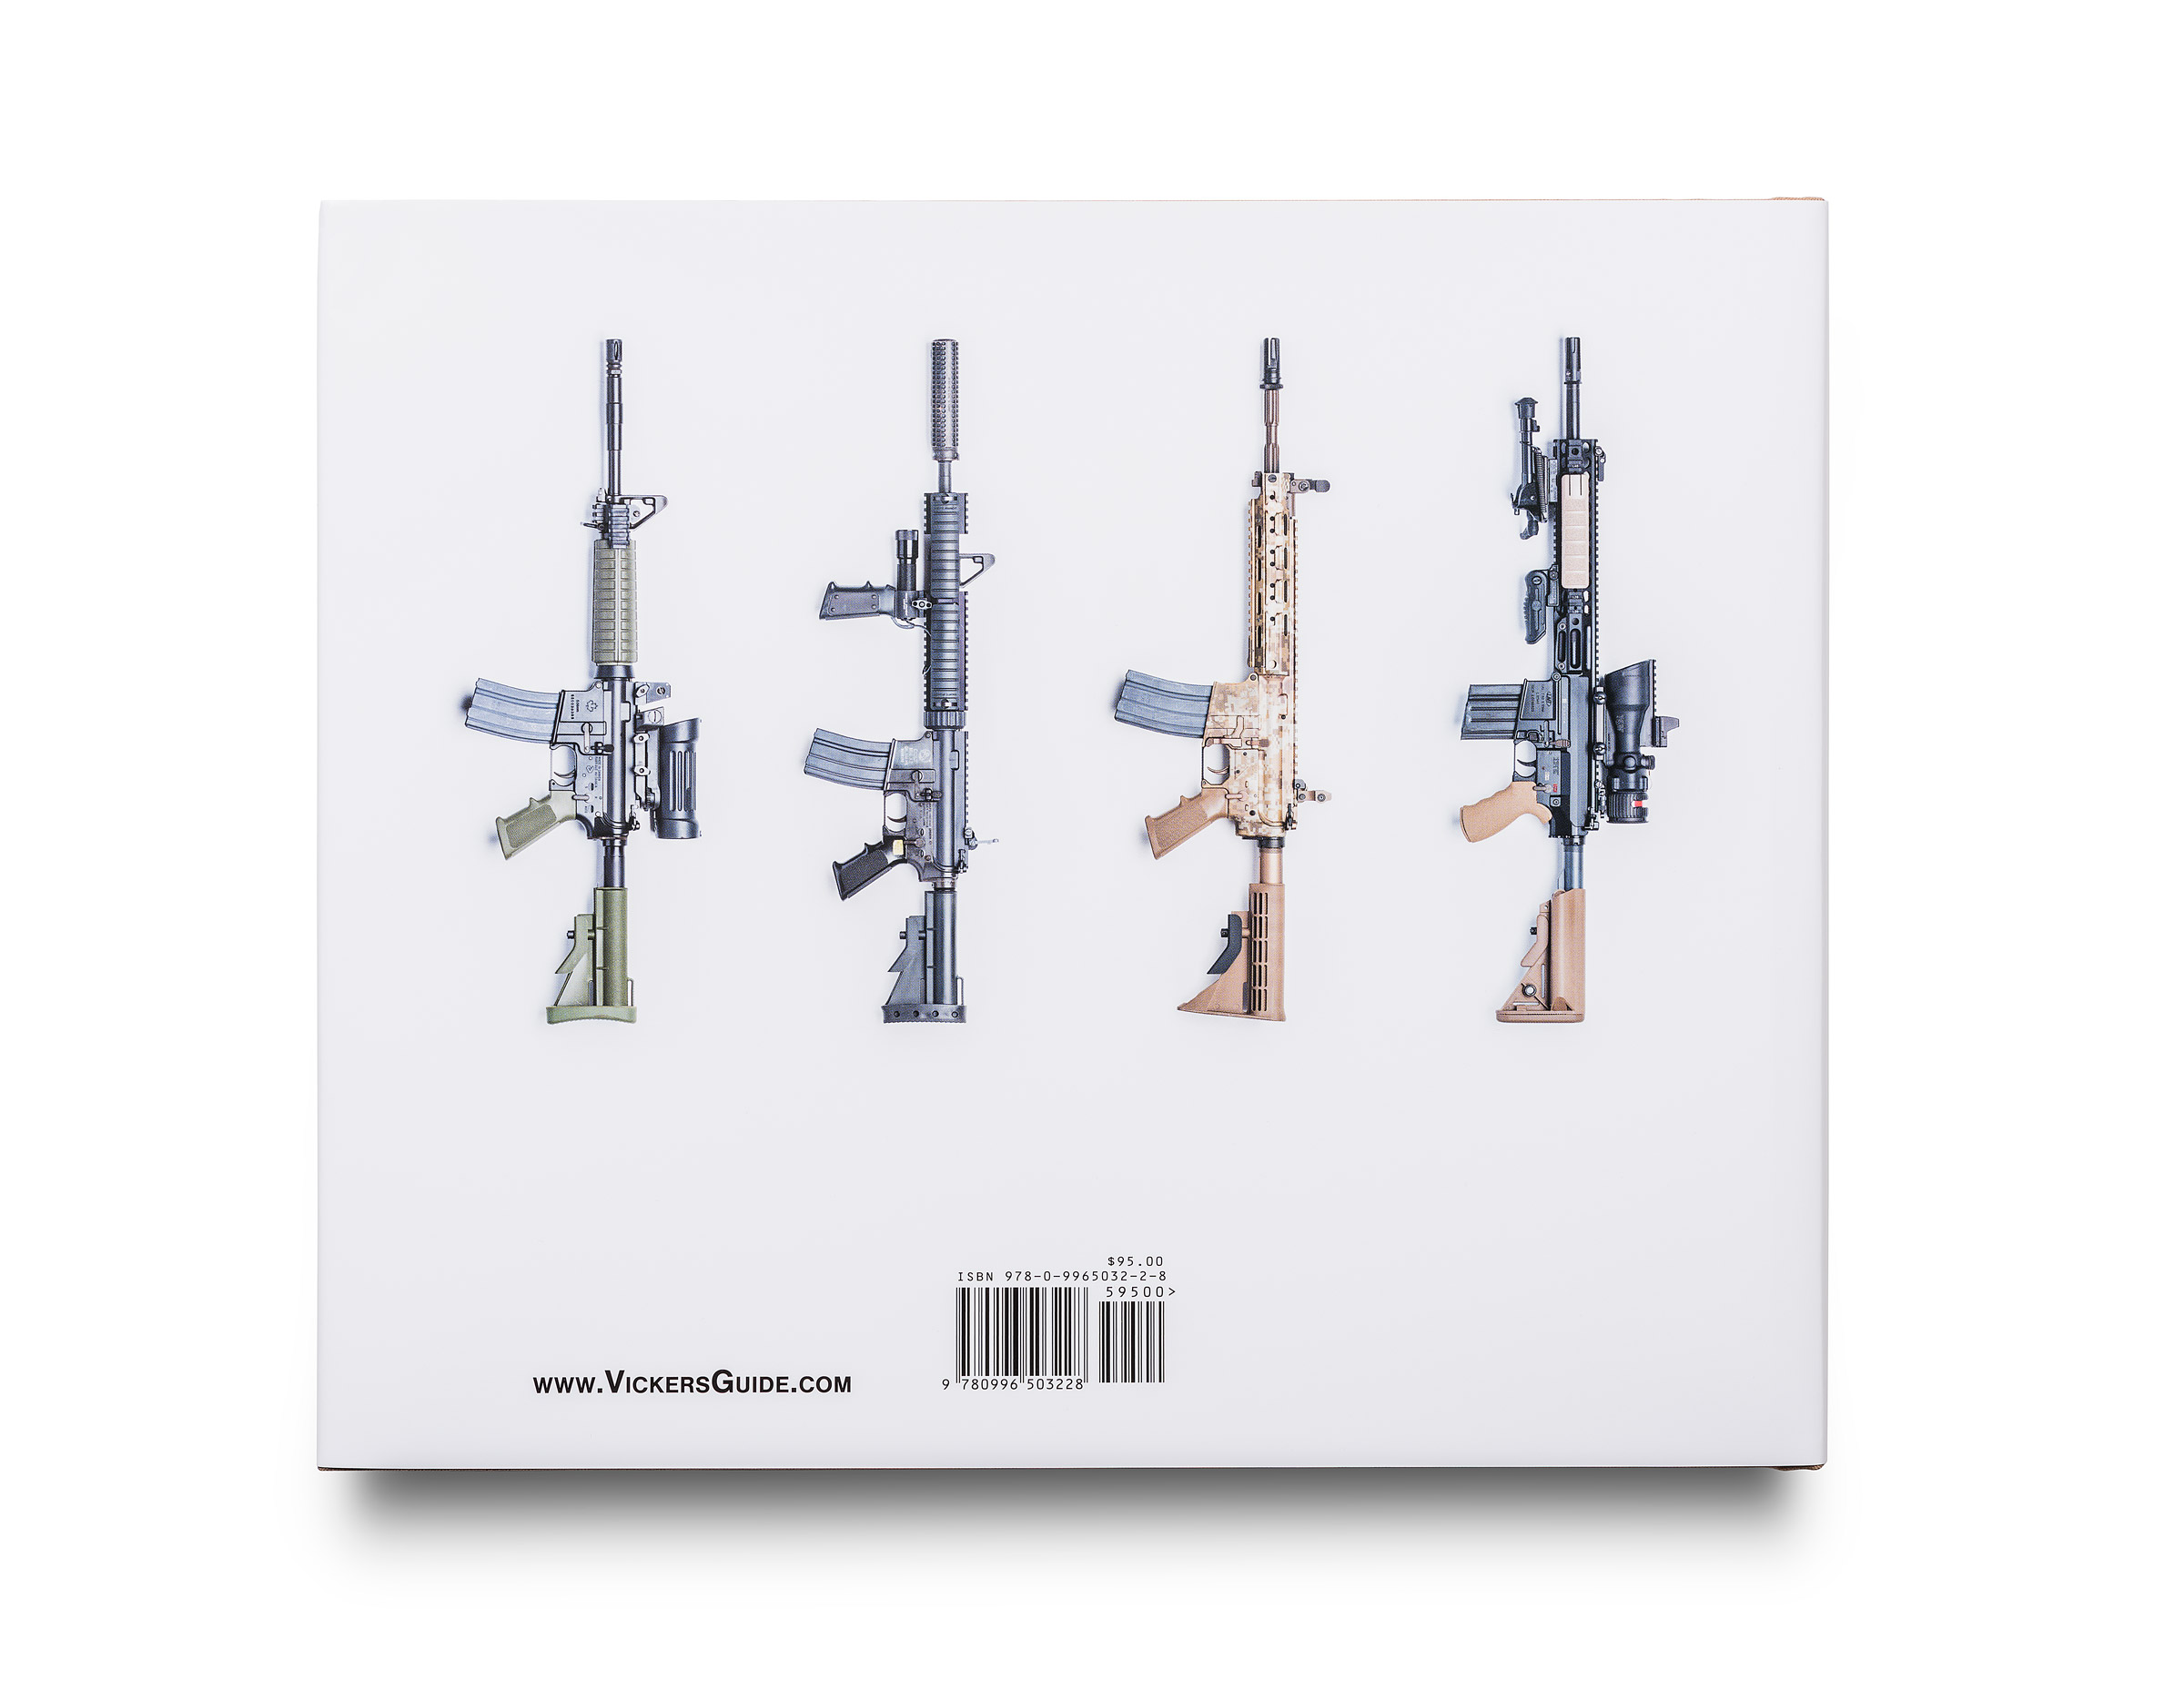 Vickers Guide AR-15 Volume 2